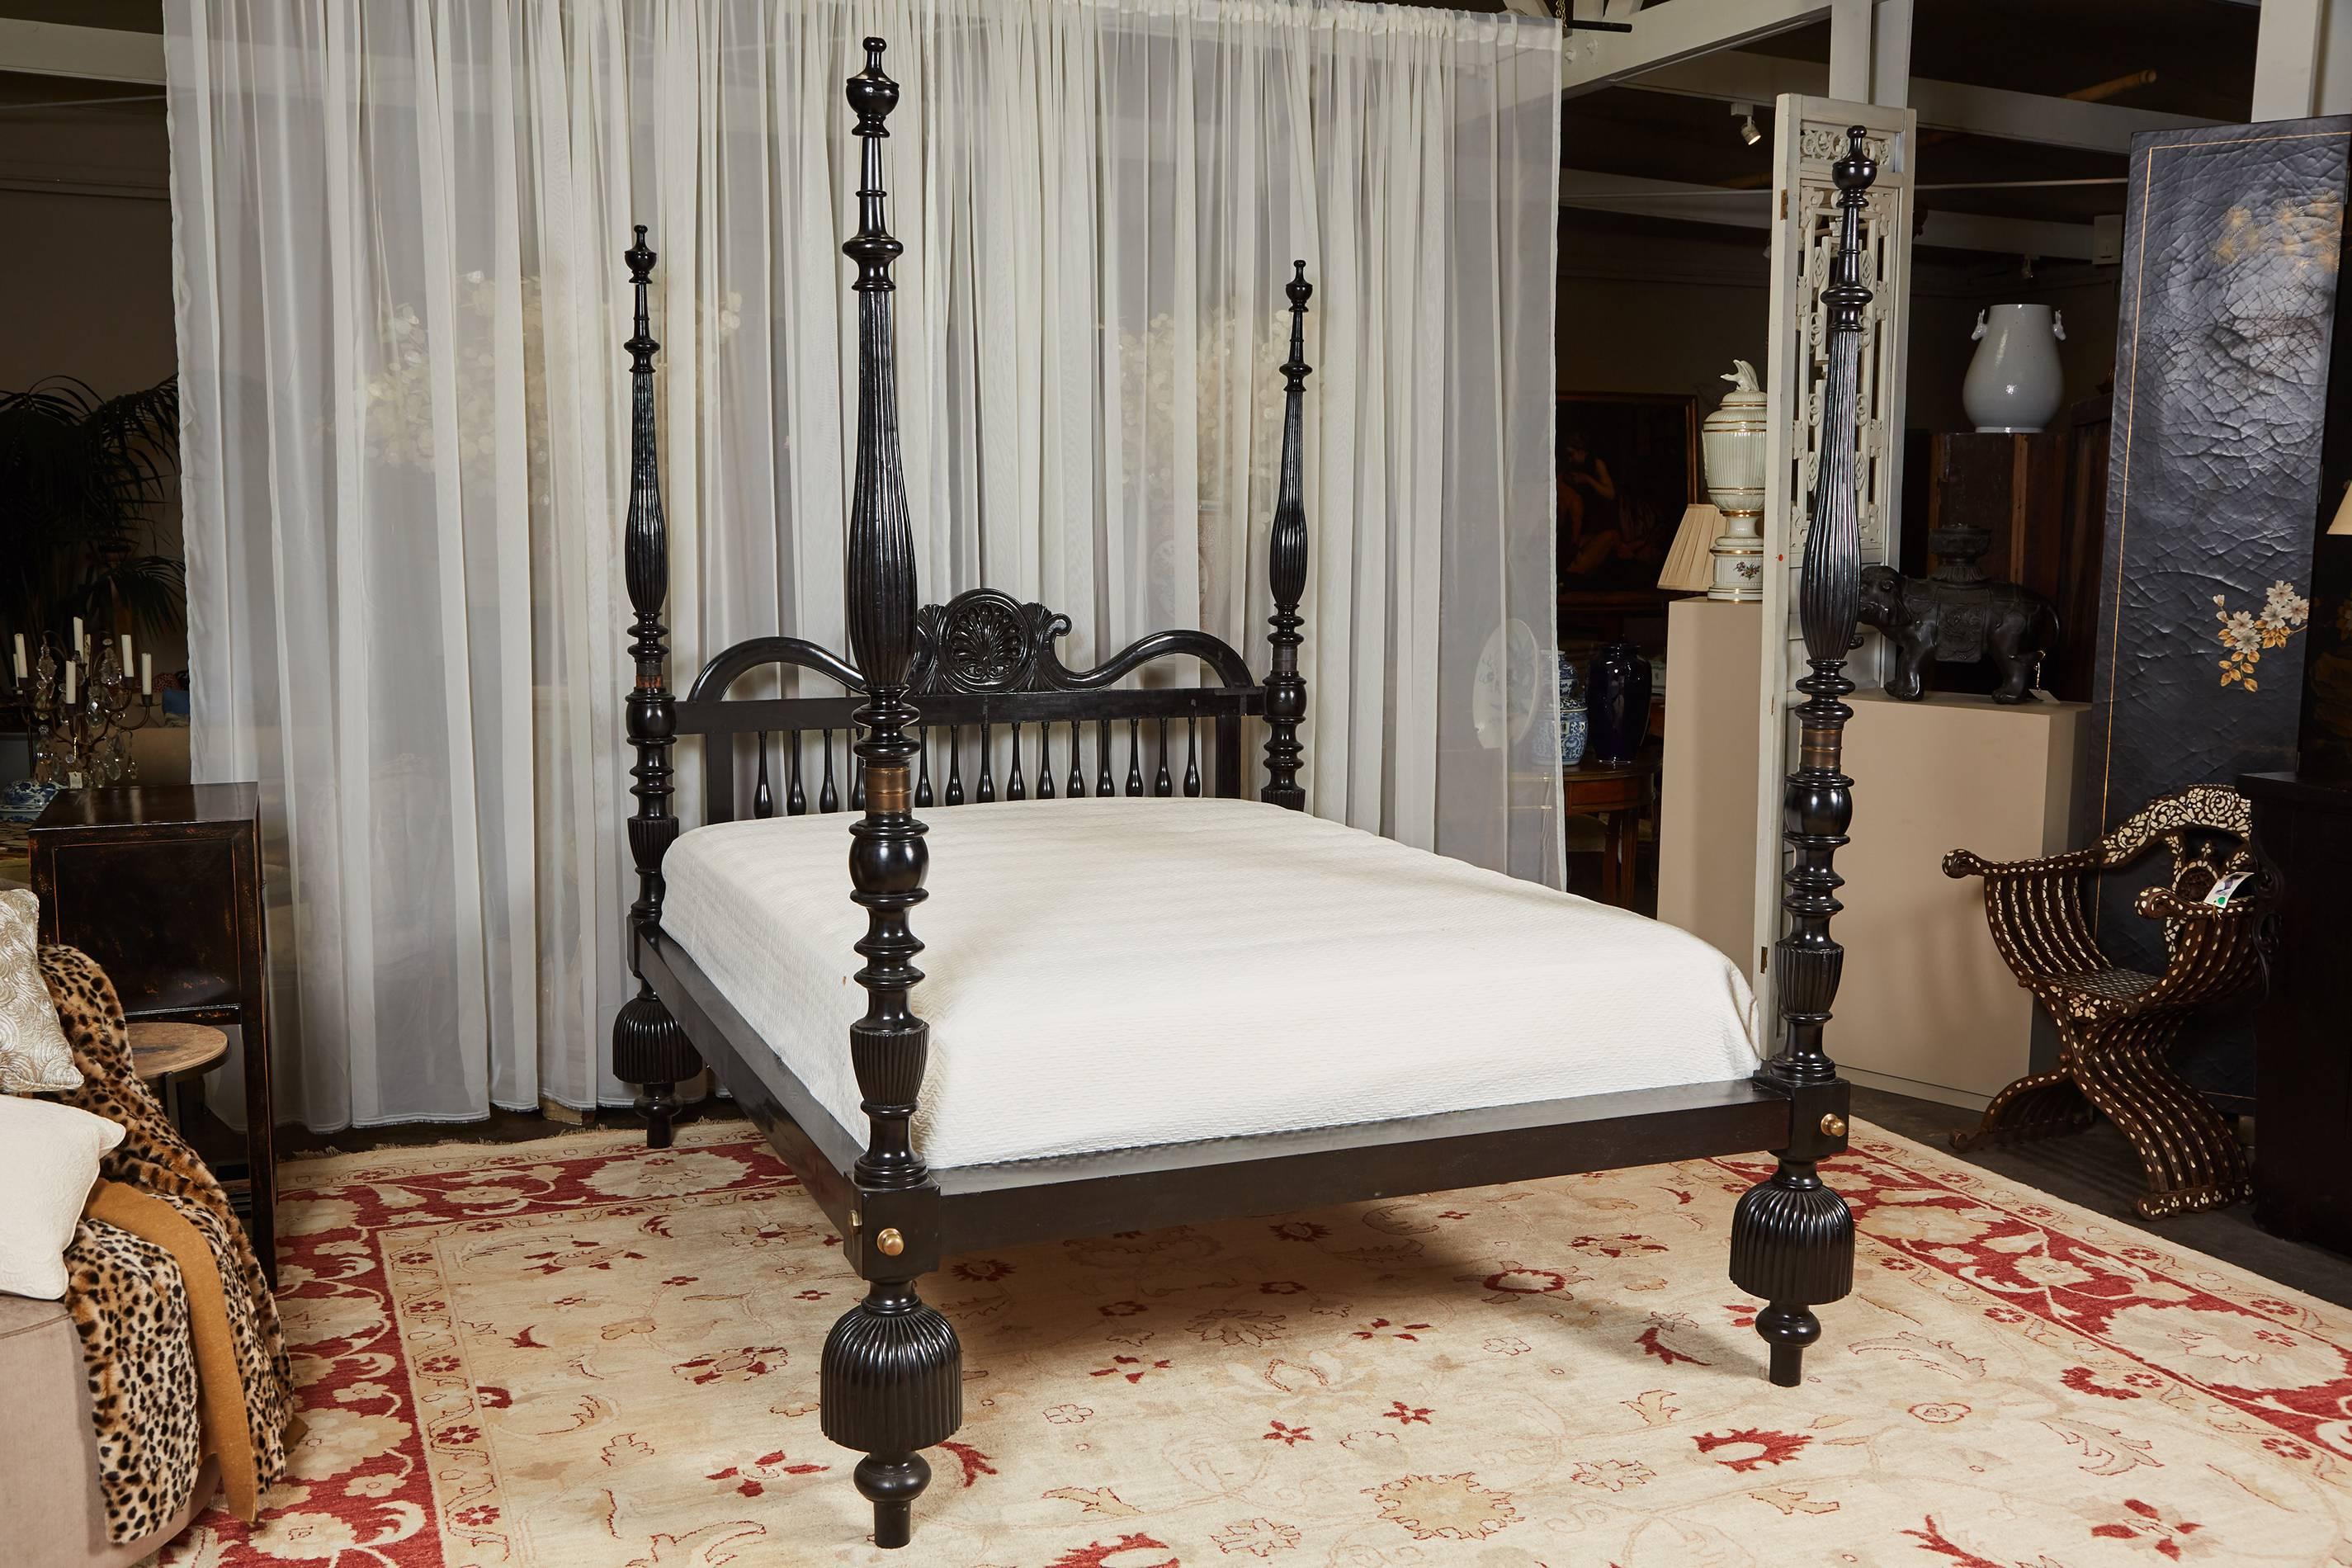 A queen tassel foot 4-poster bed, in ebony wood. The bed features intricate carvings, oversize tassel feet, a headboard consisting with shell centrepiece.